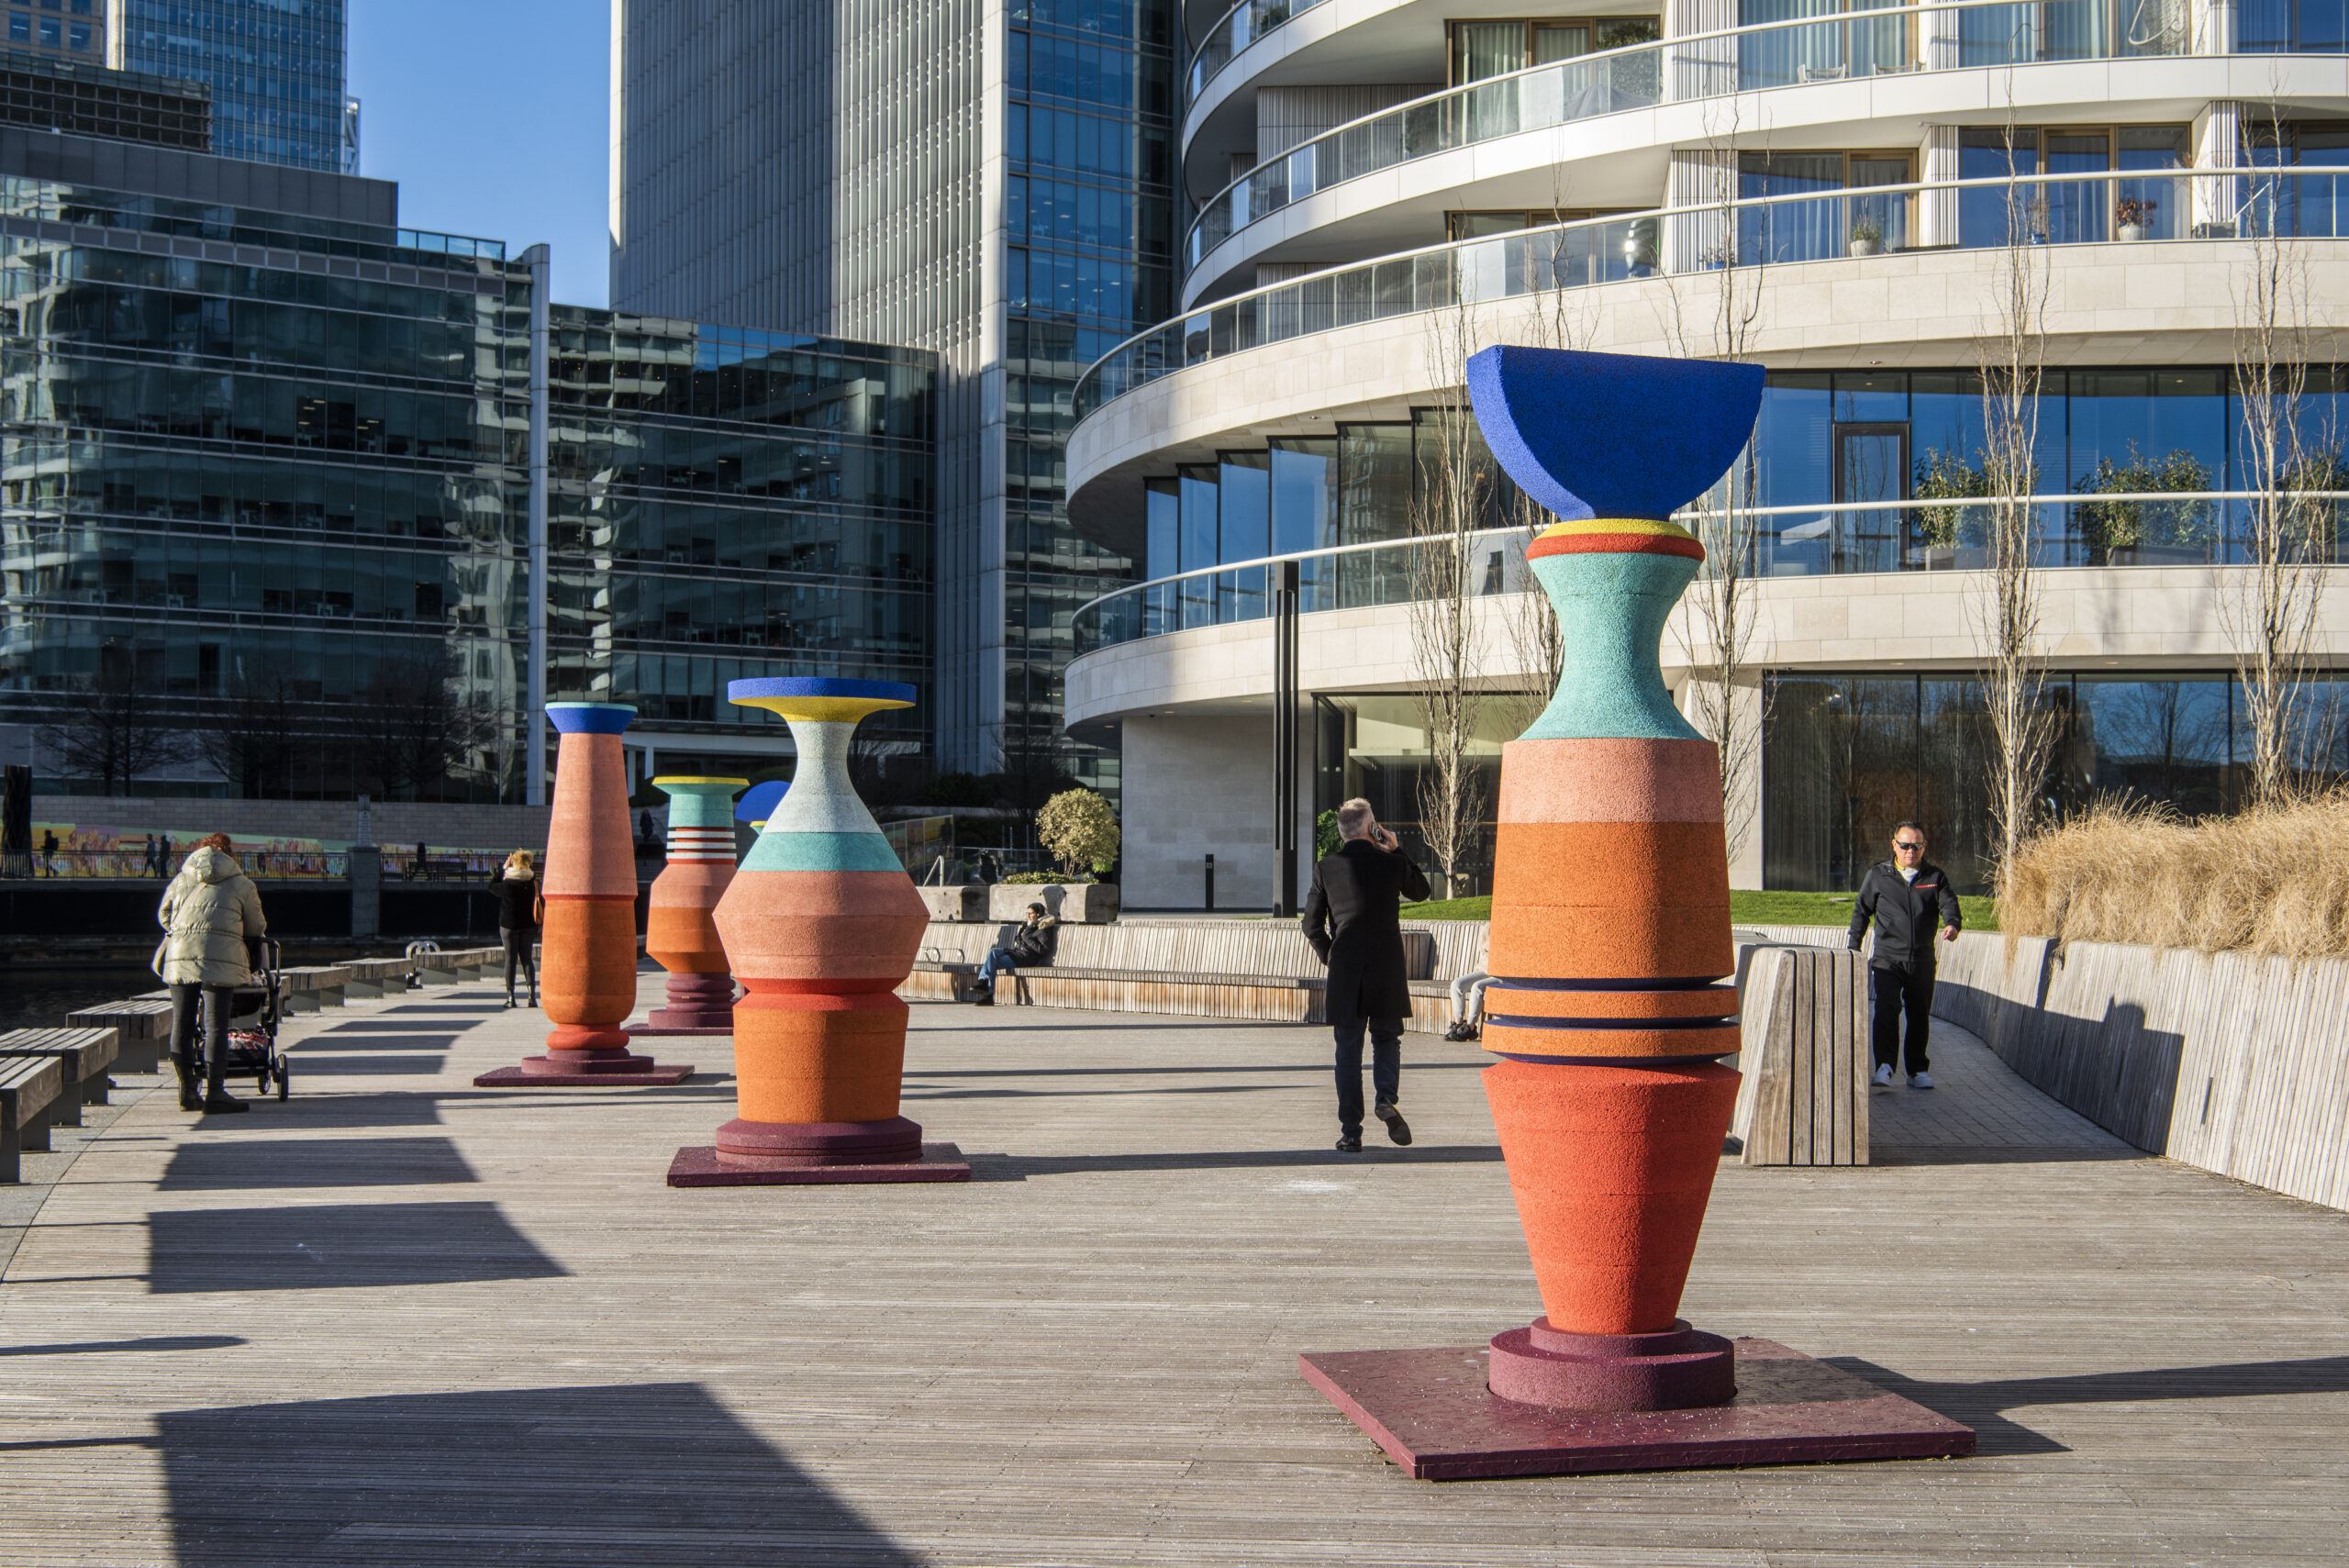 ‘Spirit of Place’: Canary Wharf welcomes sculptures by Simone Brewster to public art exhibition – 30.01.24